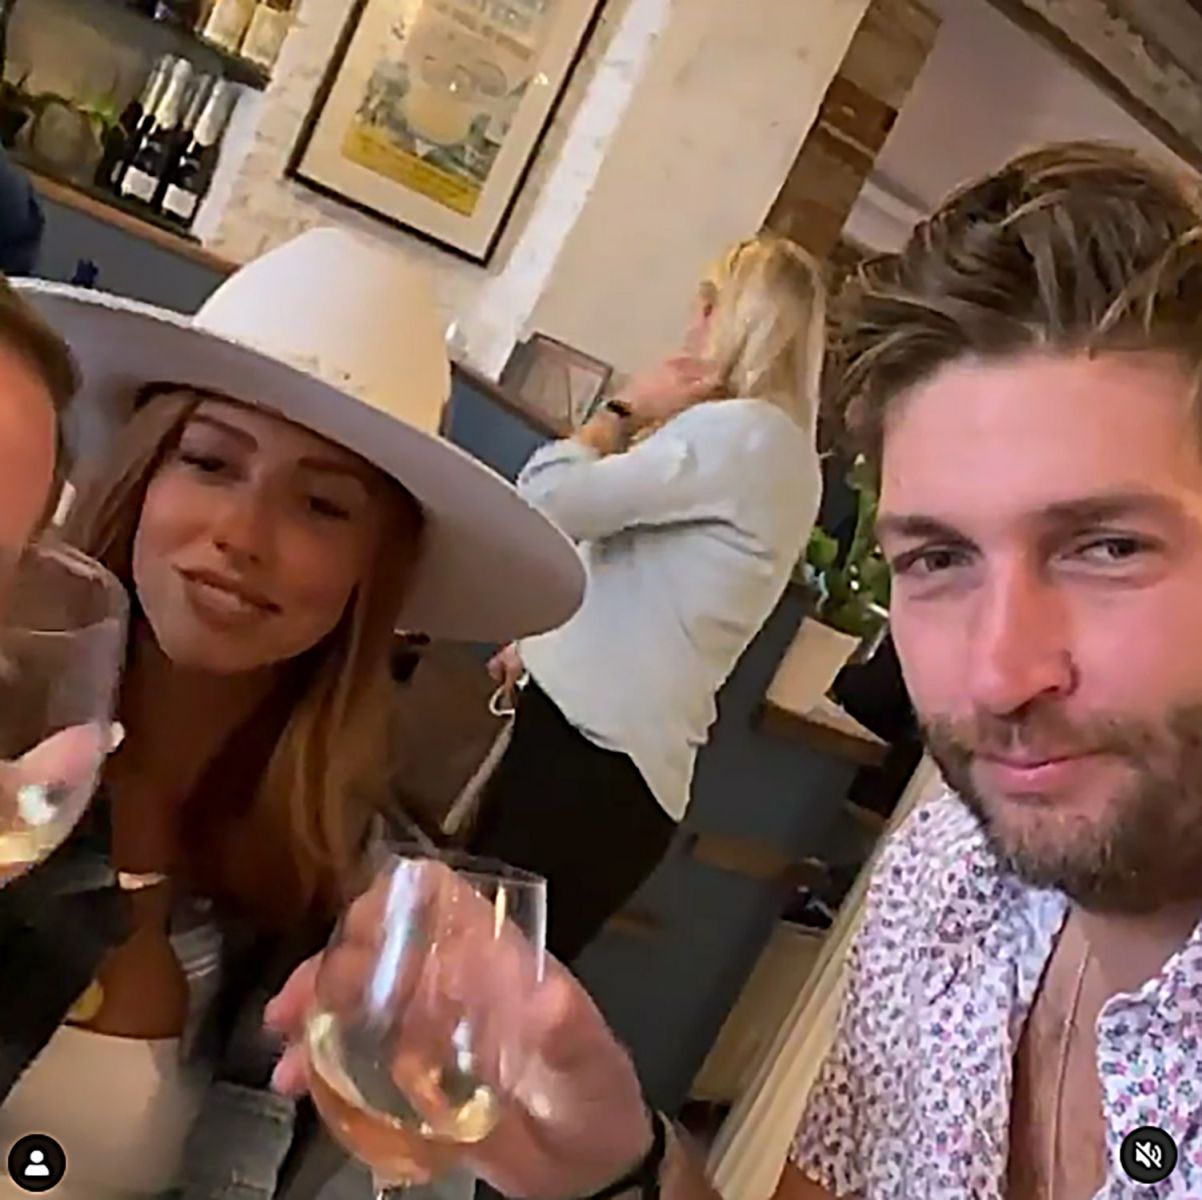 Shannon Ford and Jay Cutler as seen enjoying a drink together